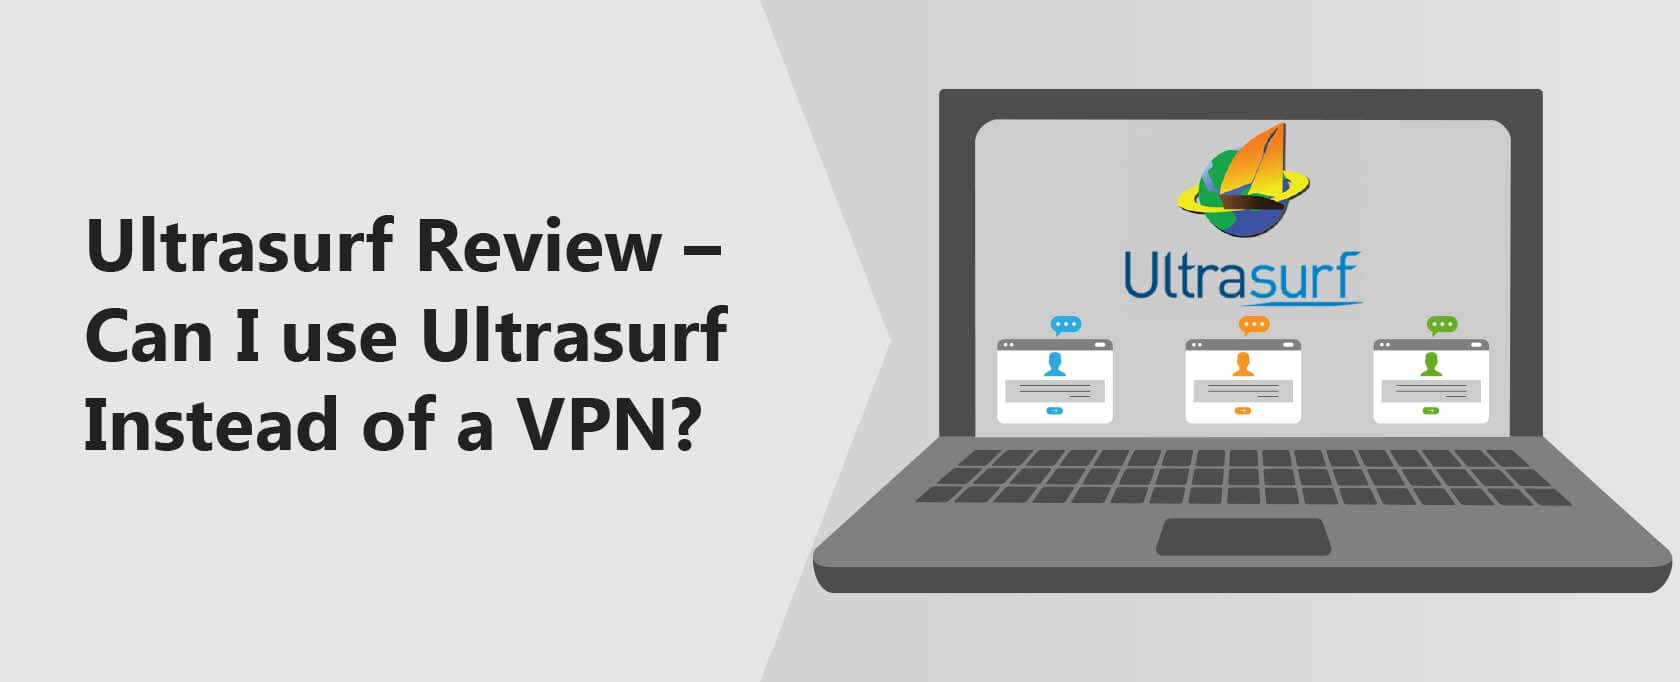 Ultrasurf Review – Should You Use Ultrasurf Instead of a VPN?